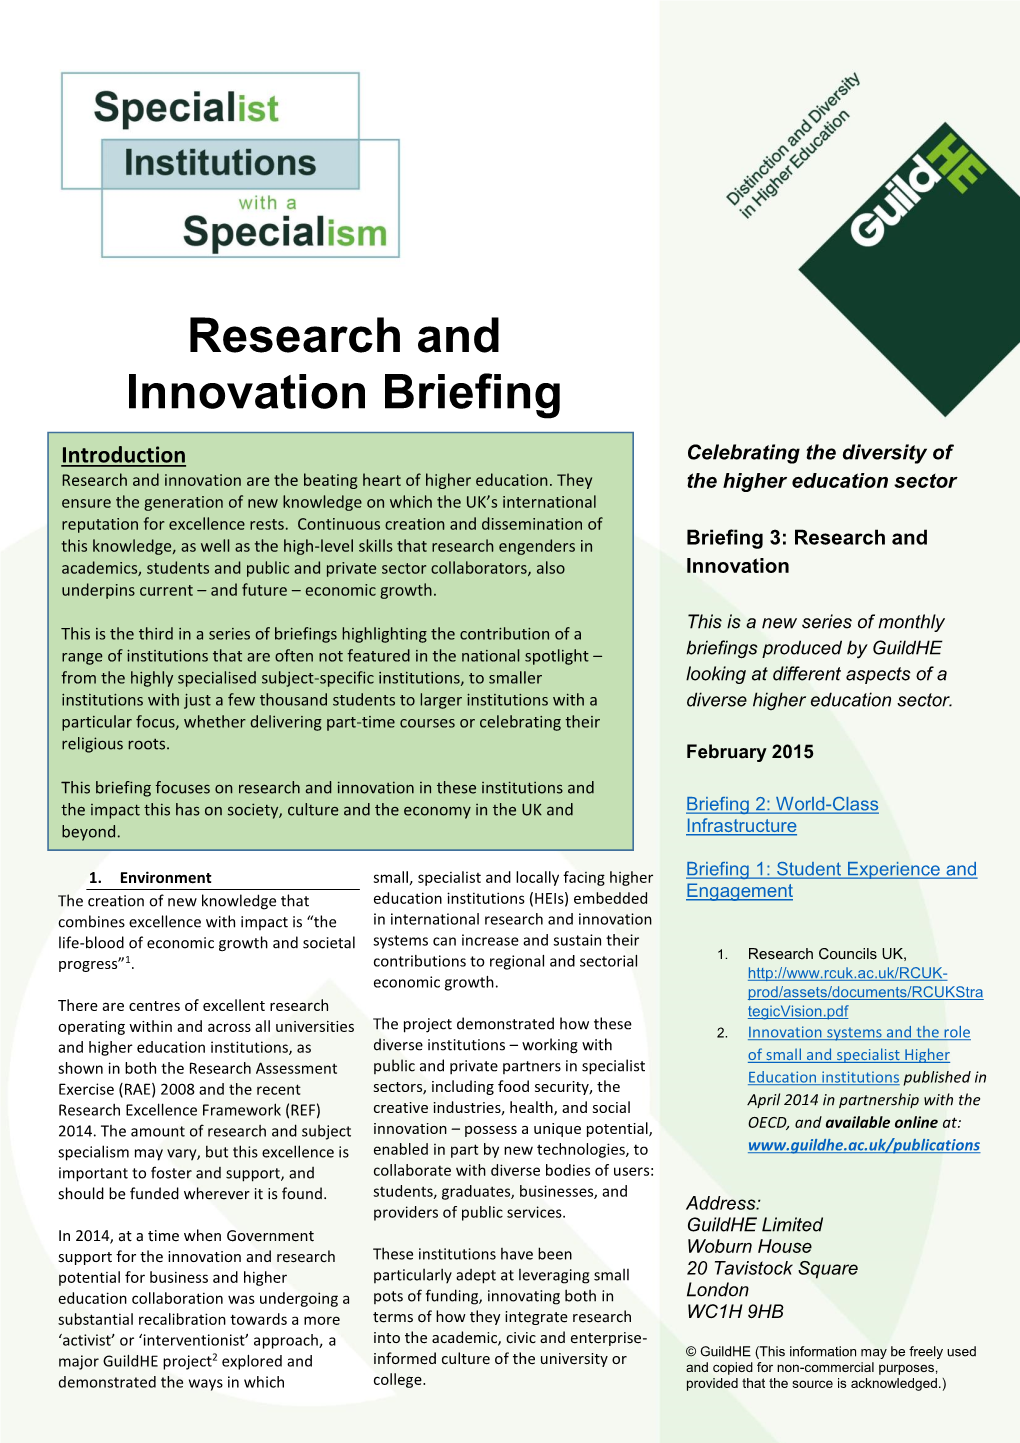 Research and Innovation Briefing